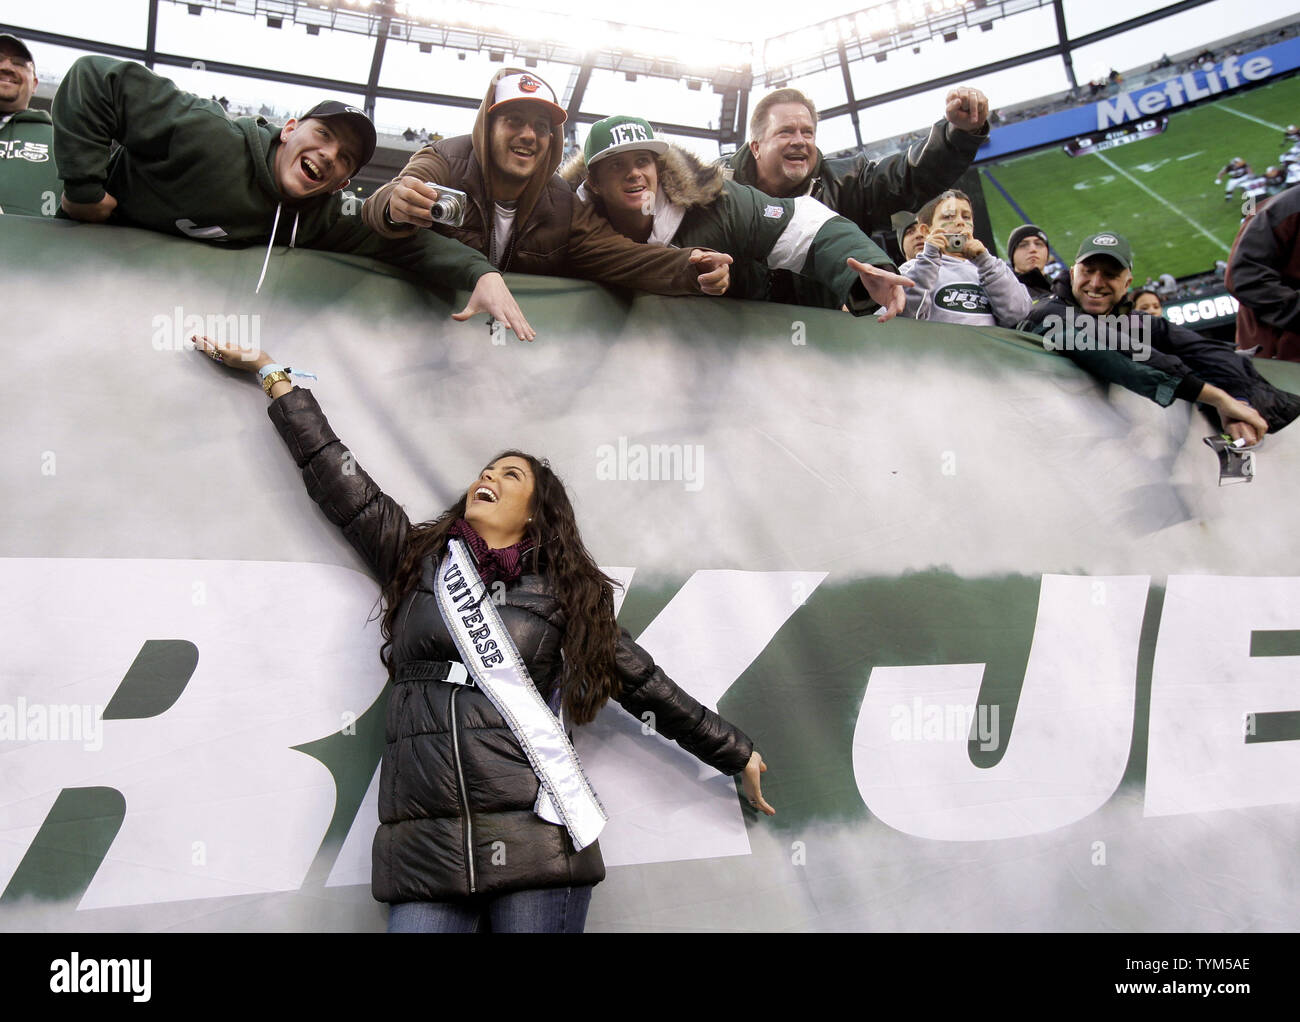 Miss Universe Ximena Navarrete reacts with fans before the New York Jets play the Miami Dolphins in week 14 of the NFL season at New Meadowlands Stadium in East Rutherford, New Jersey on December 12, 2010. The Dolphins defeated the Jets 10-6.    UPI /John Angelillo Stock Photo